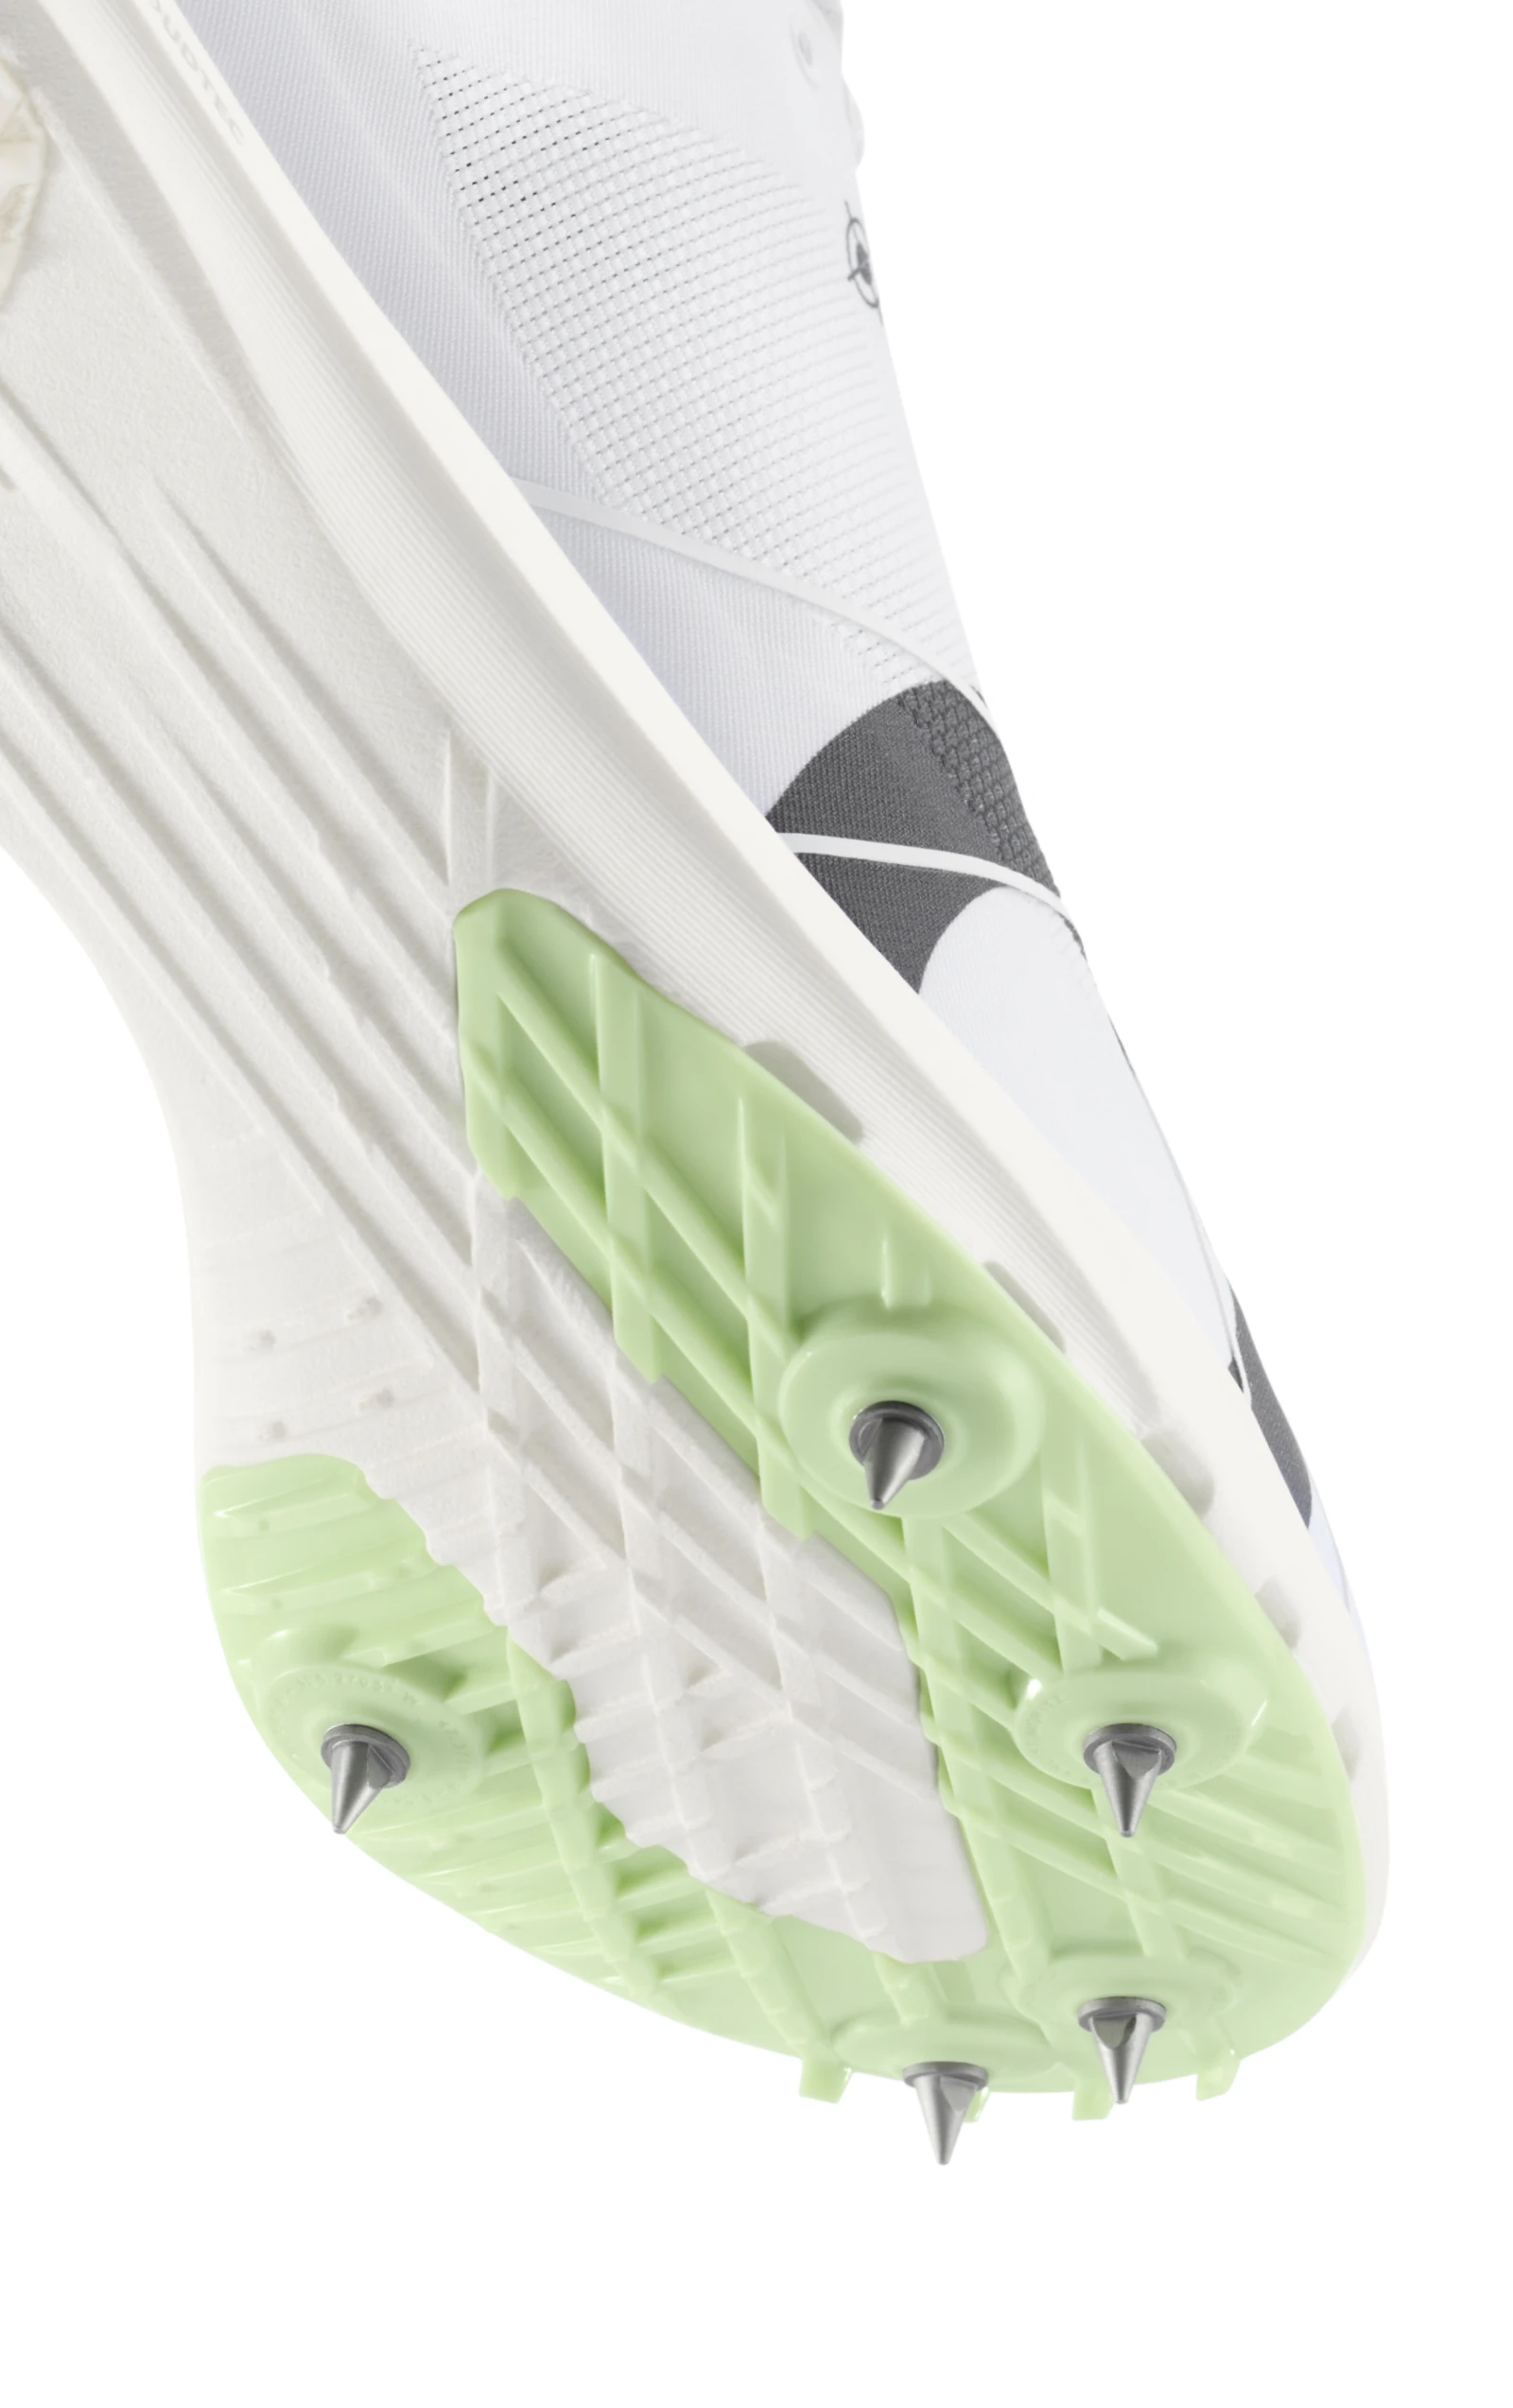 on Cloudspike 1500M 12 , Undyed White/Mint (Men's)